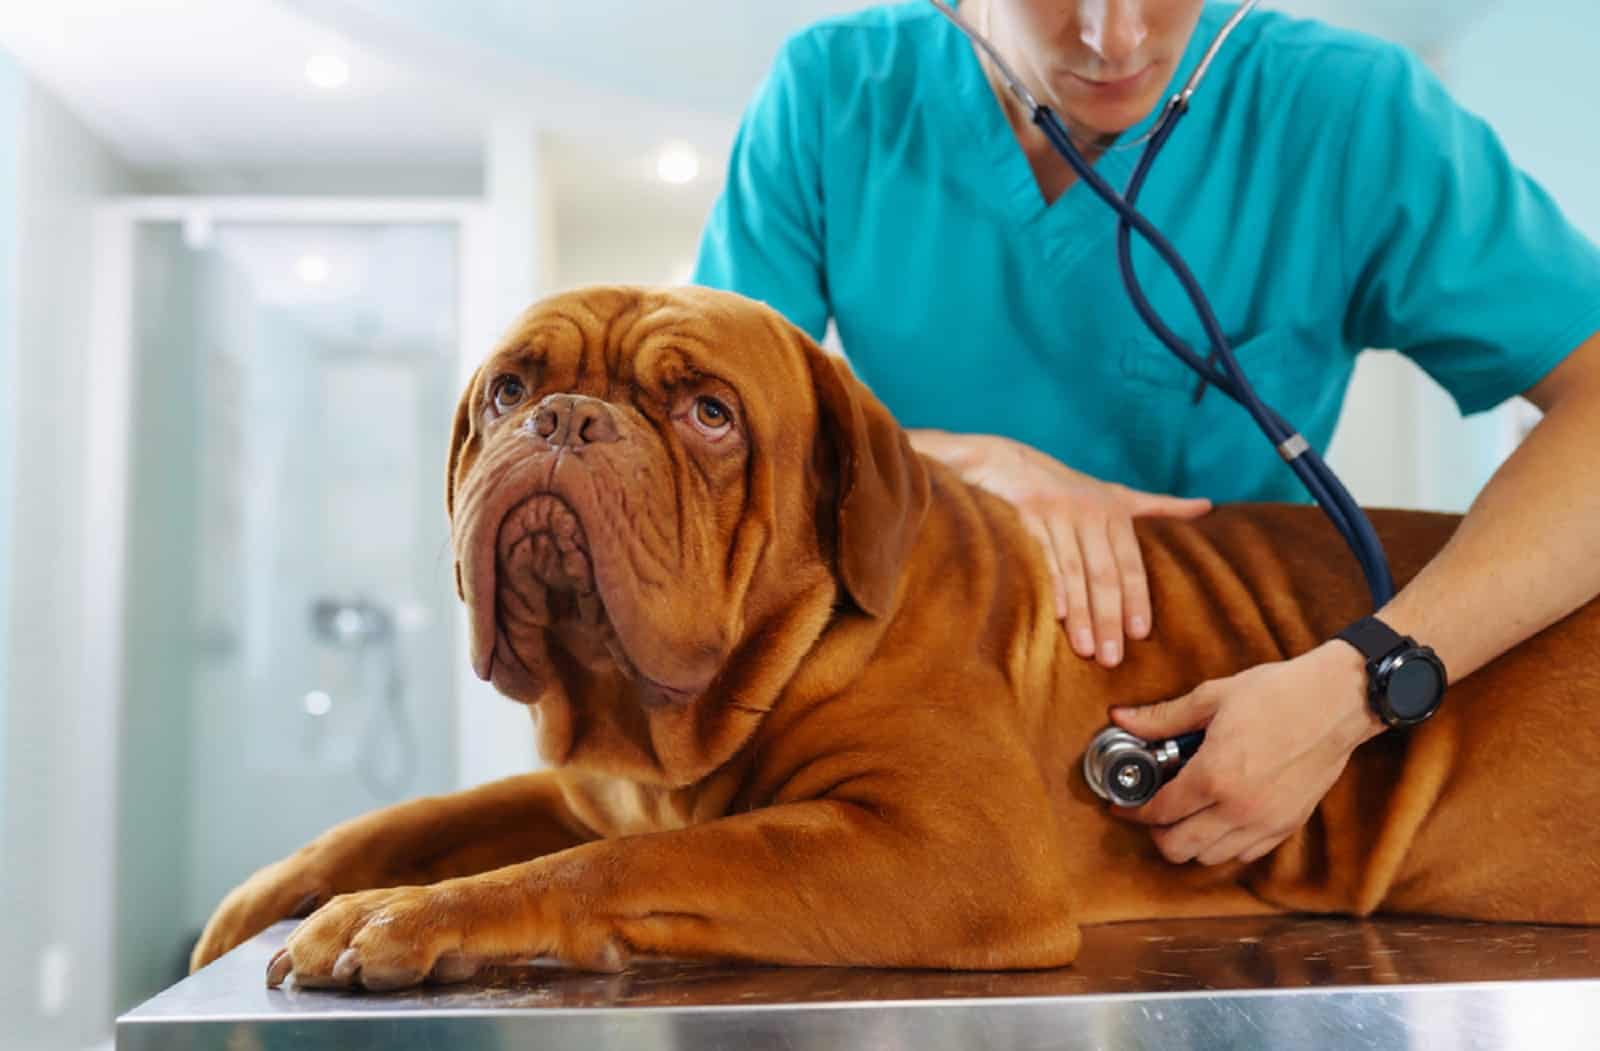 veterinarian checking up the dog on table in veterinary clinic